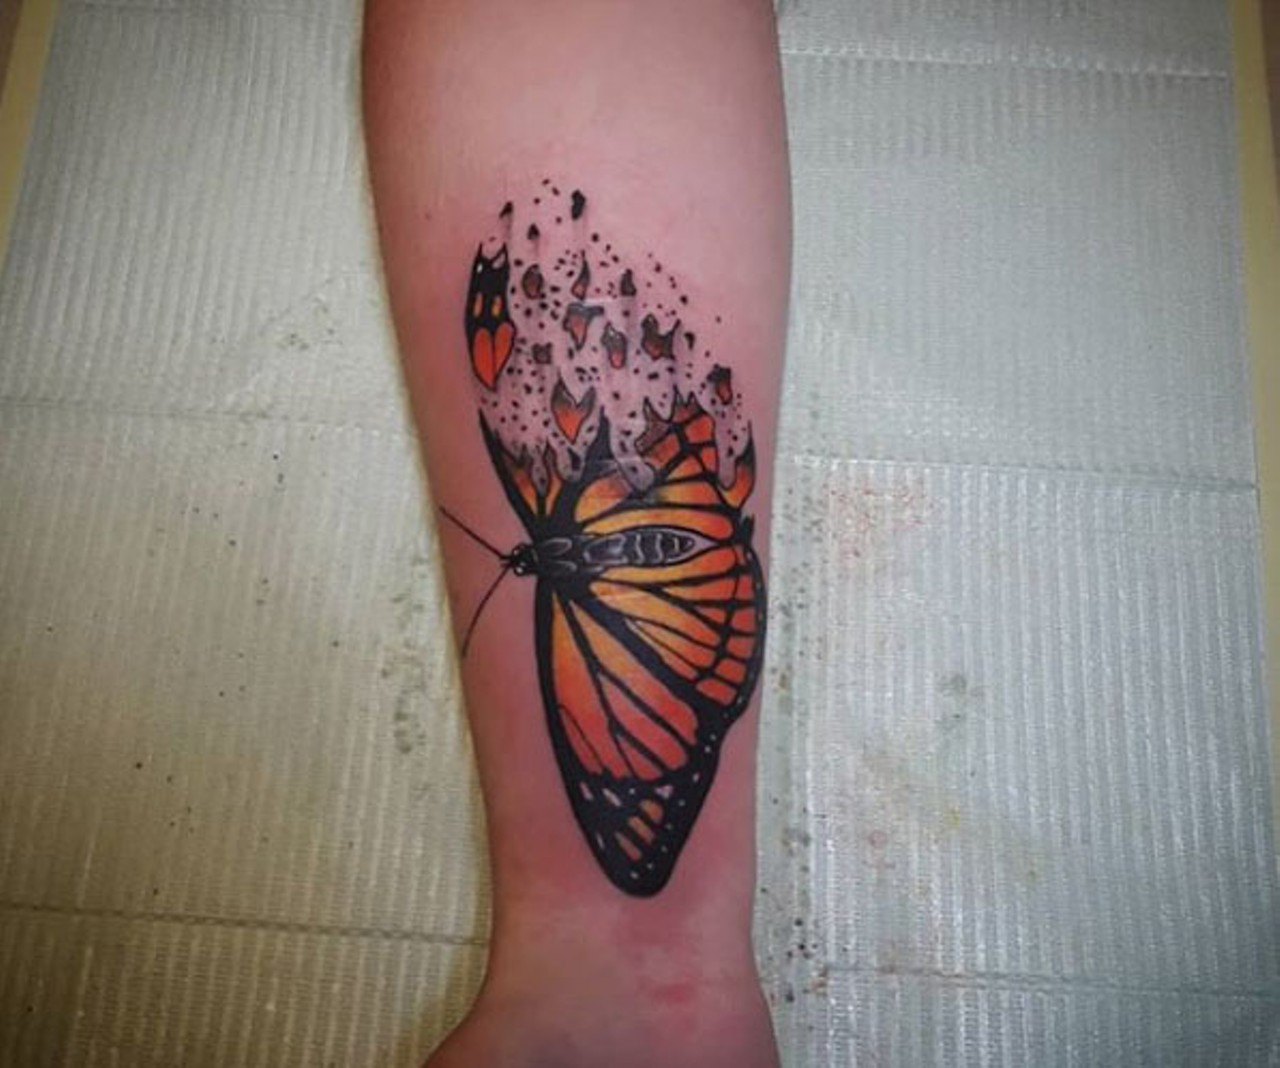 Eclectic Tattoo Company
7054 Avon Belden Rd., North Ridgeville, 440-327-4465
This North Ridgeville tattoo shop is more than eclectic, offering a variety of tattoos and piercings, and even has a mobile tattoo trailer. Pictured tattoo by Jason Shaw, @jasonshawtattoos
Photo via eclectictattooco/Instagram